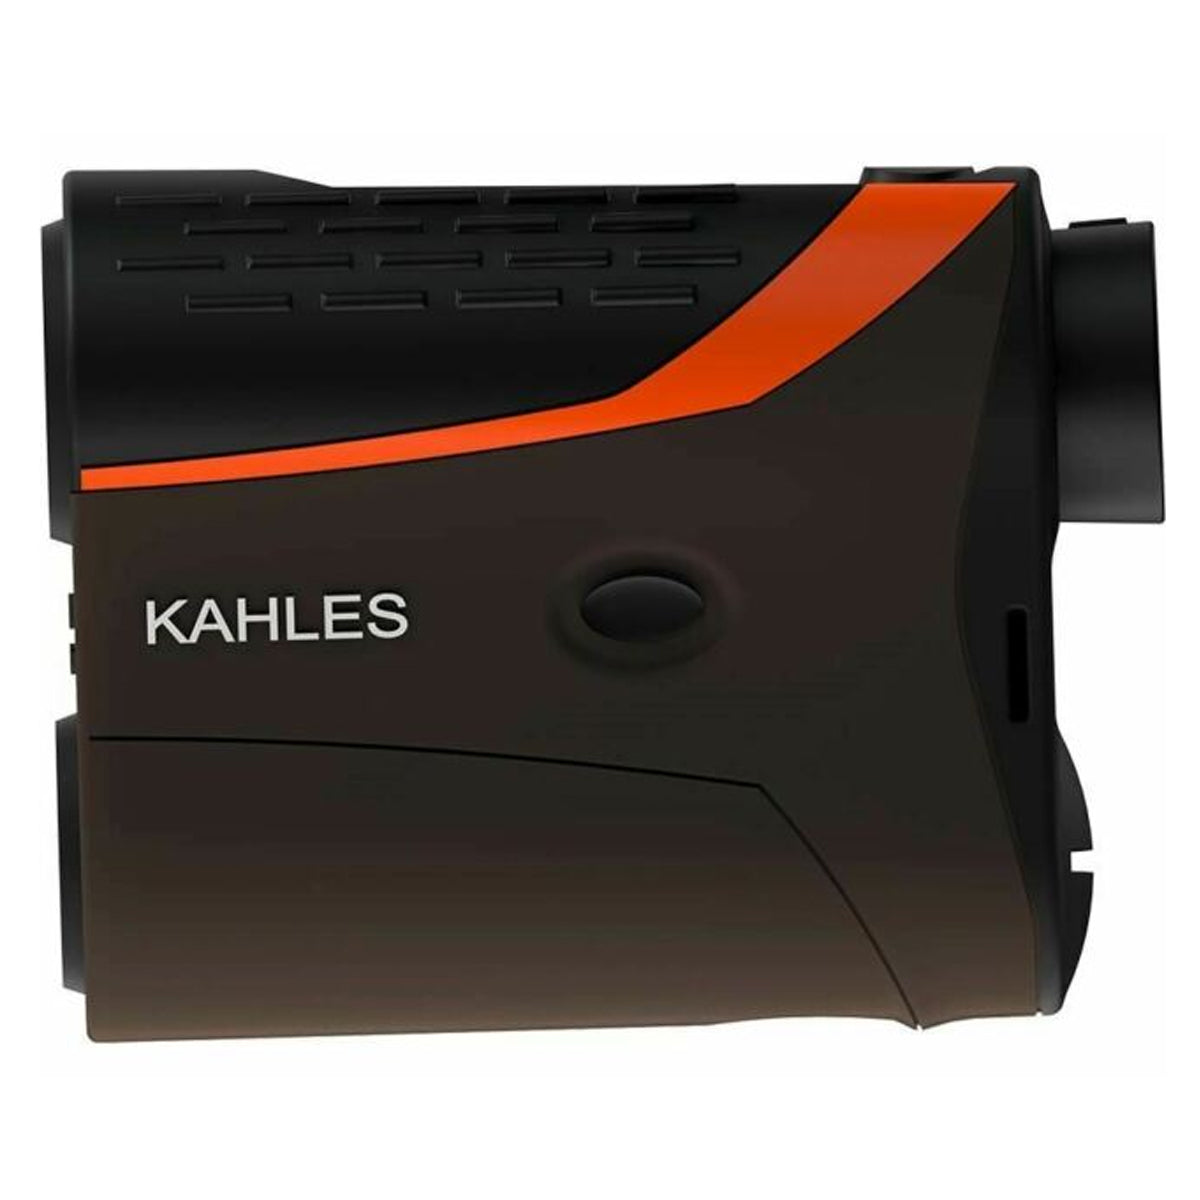 Kahles Helia Mono LRF 7x25 in  by GOHUNT | Kahles - GOHUNT Shop